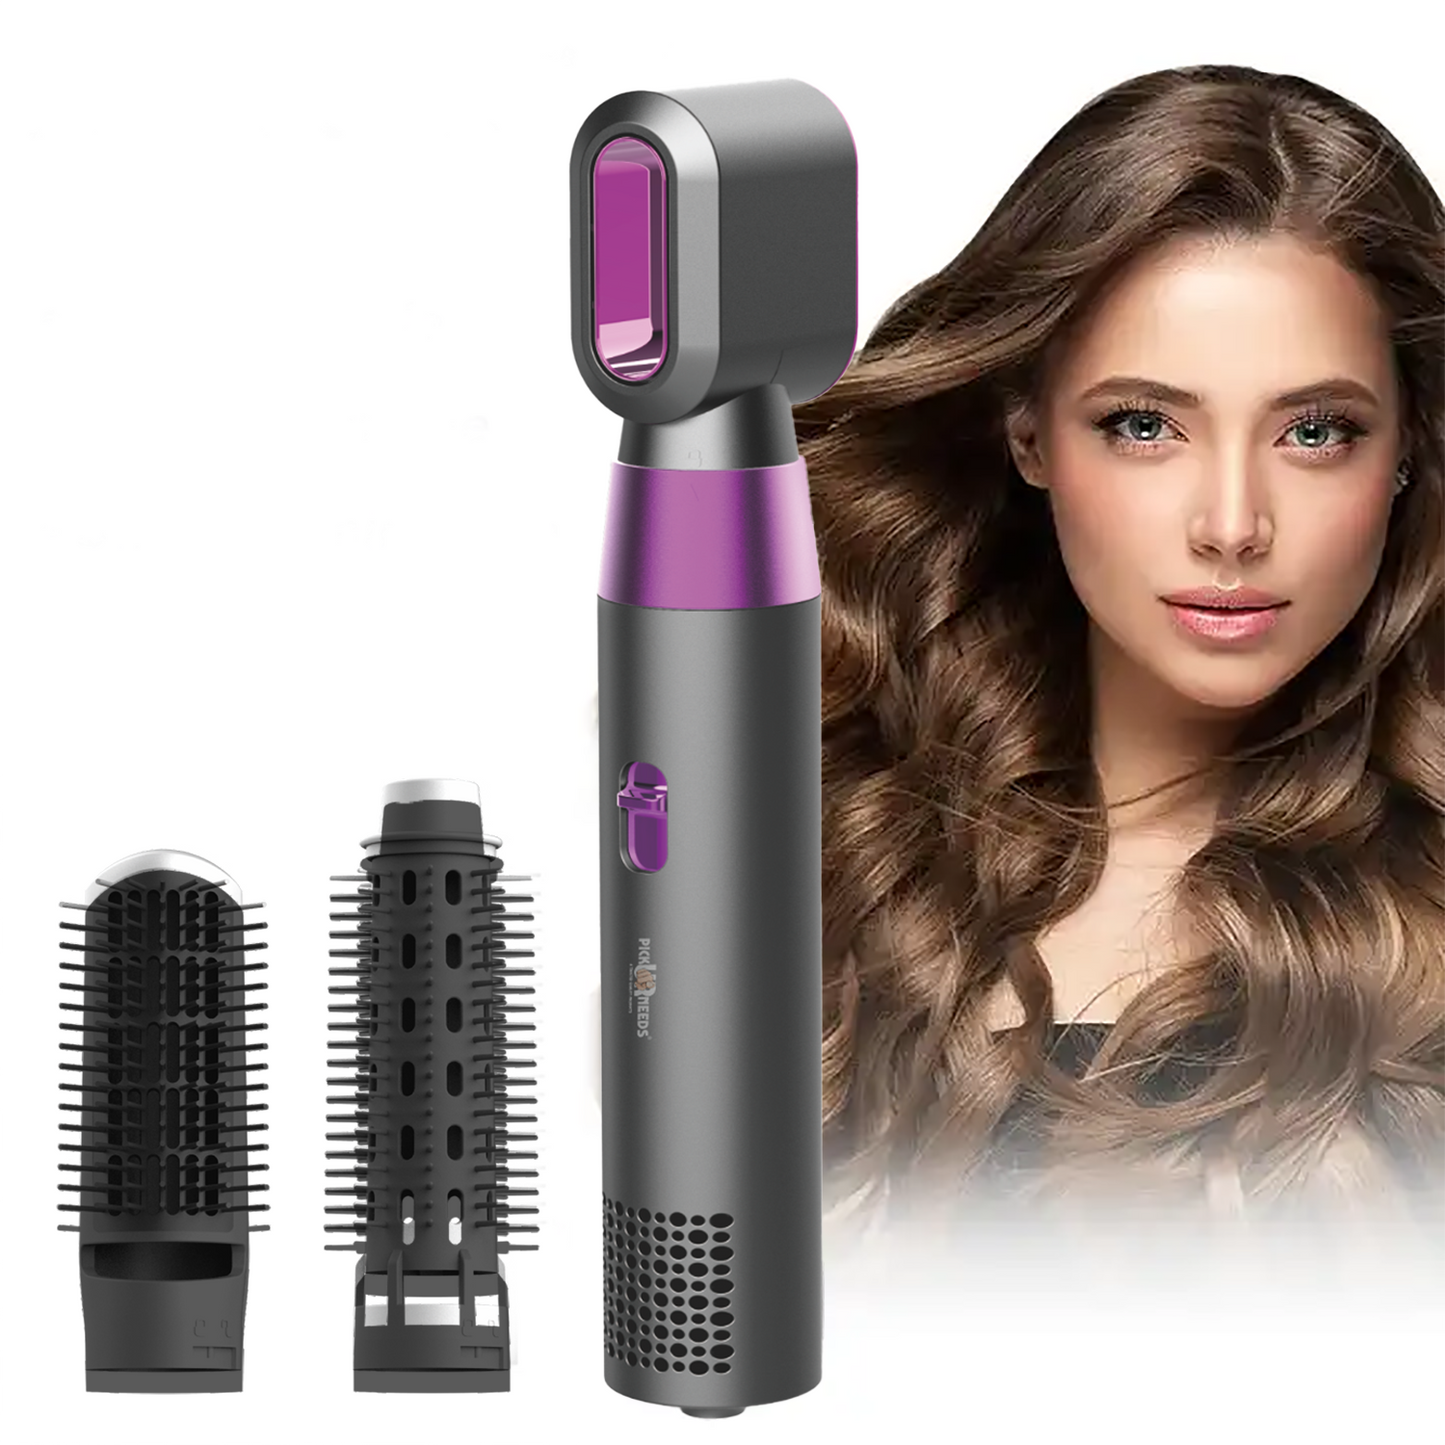 Pick Ur Needs Professional 3 in 1 Hair Dryer For Men & Women With Hair Comb + Blower